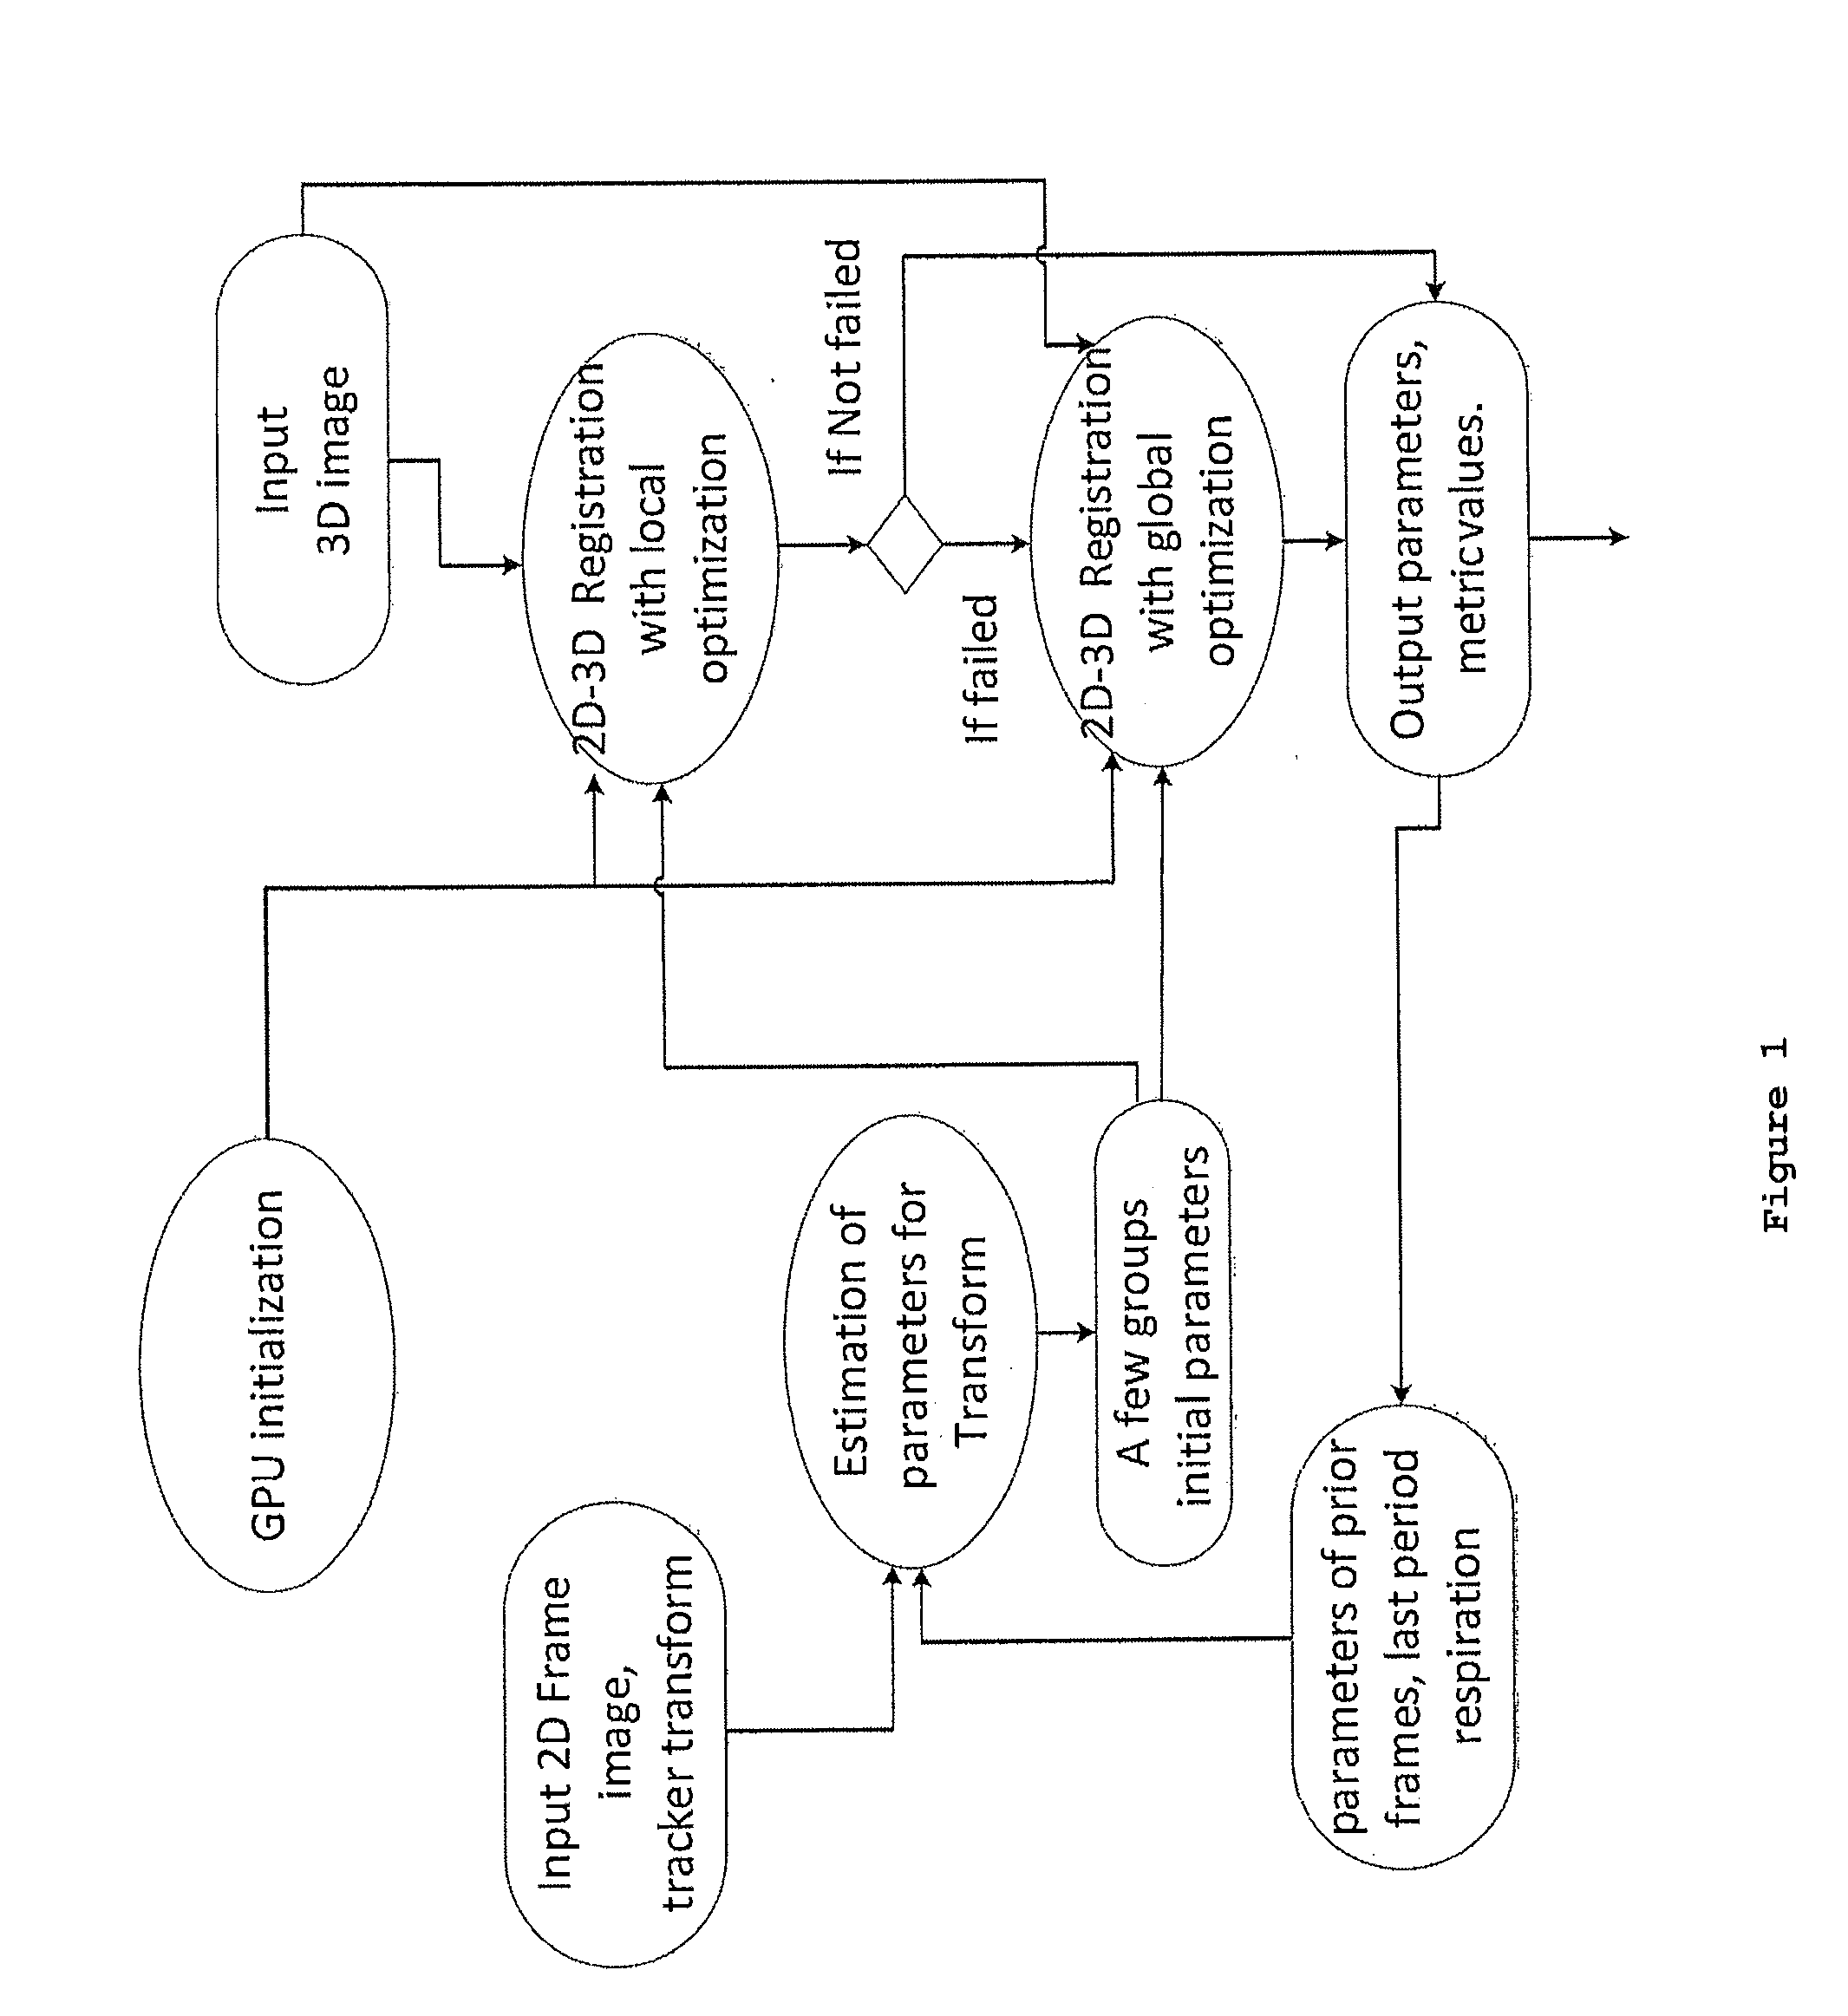 2d-3d rigid registration method to compensate for organ motion during an interventional procedure